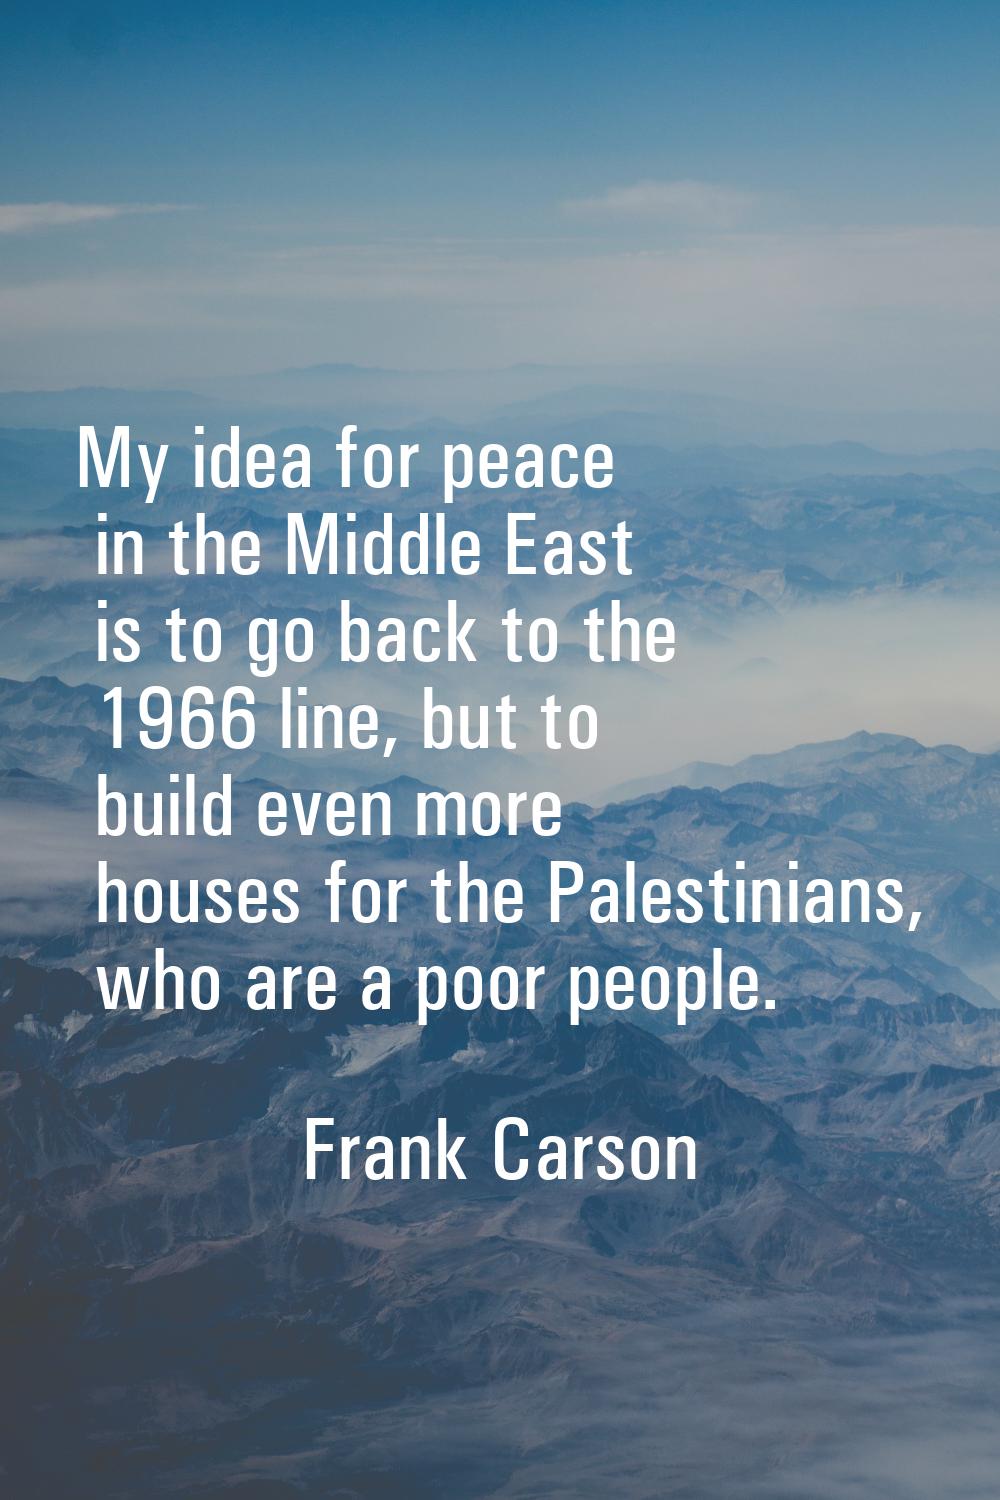 My idea for peace in the Middle East is to go back to the 1966 line, but to build even more houses 